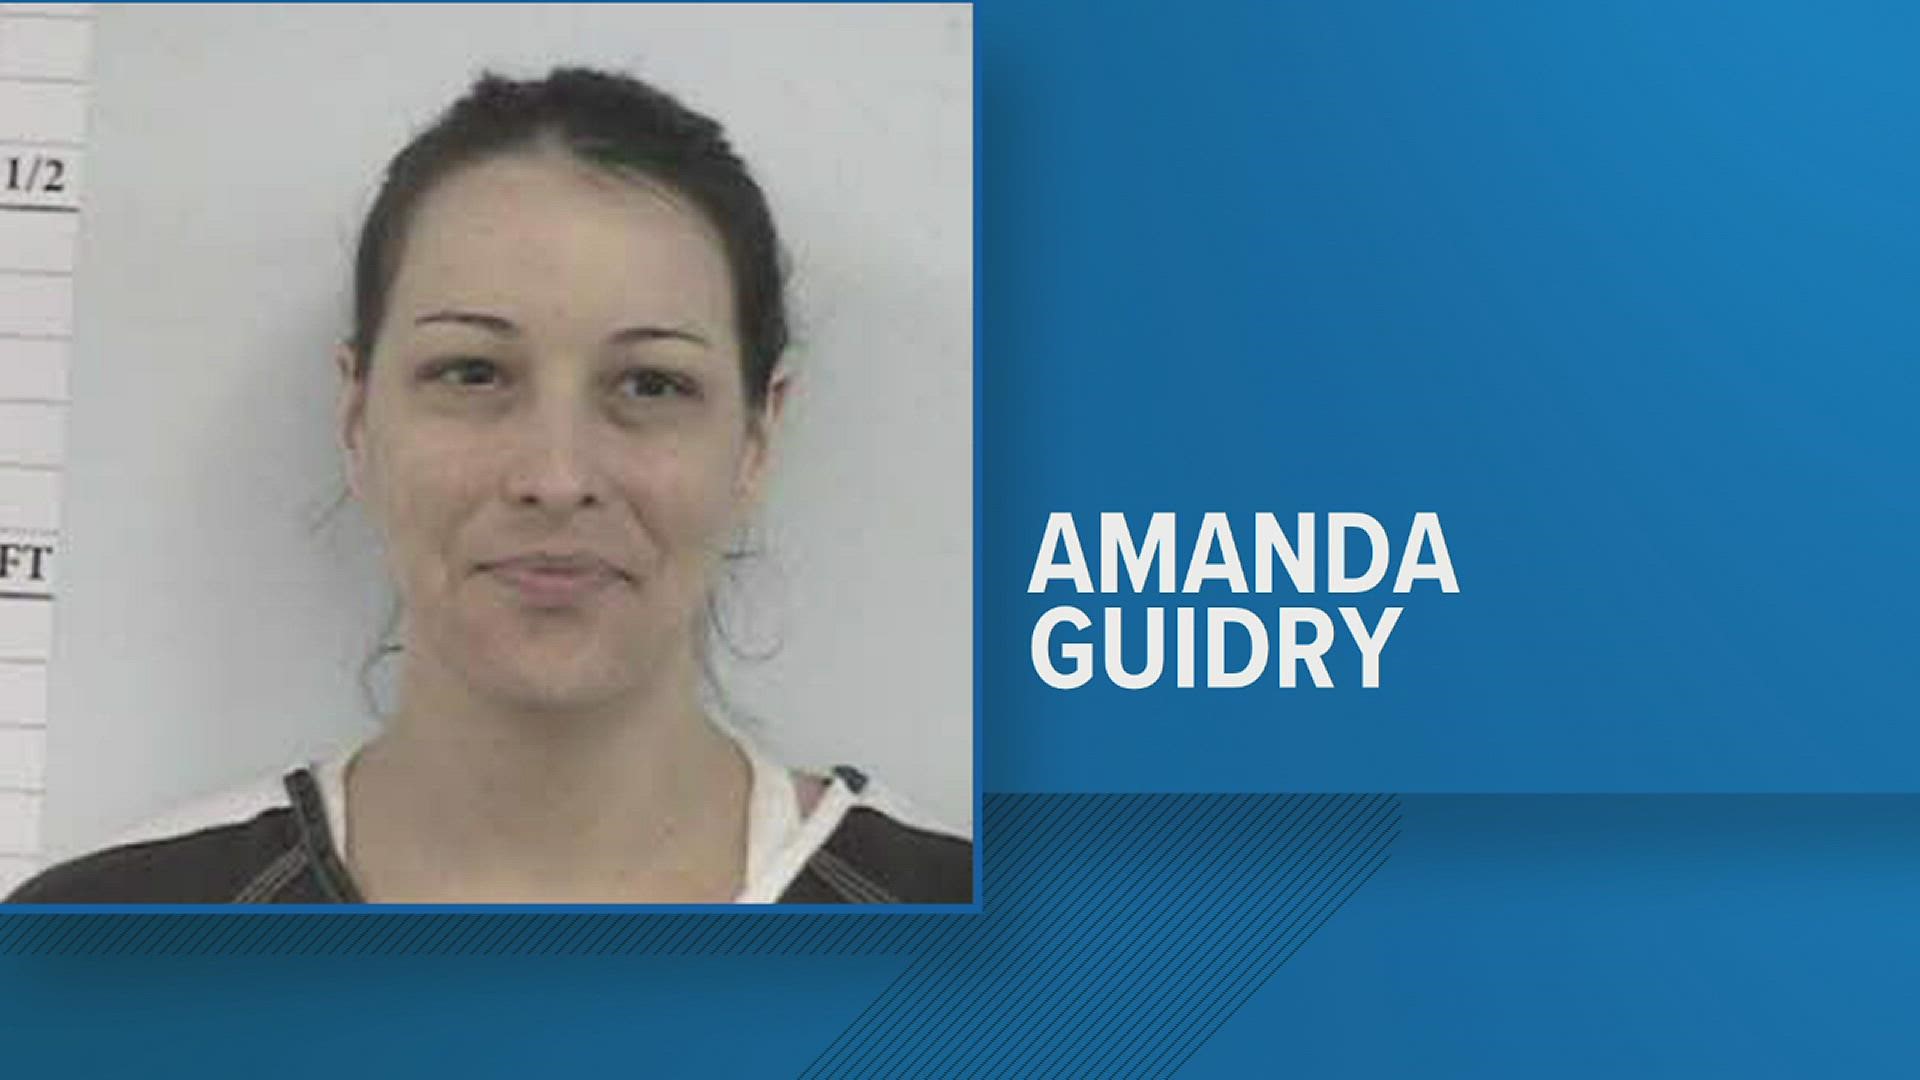 Amanda Guidry is charged with capital murder, Orange County deputies are looking for a registered sex offender and more.